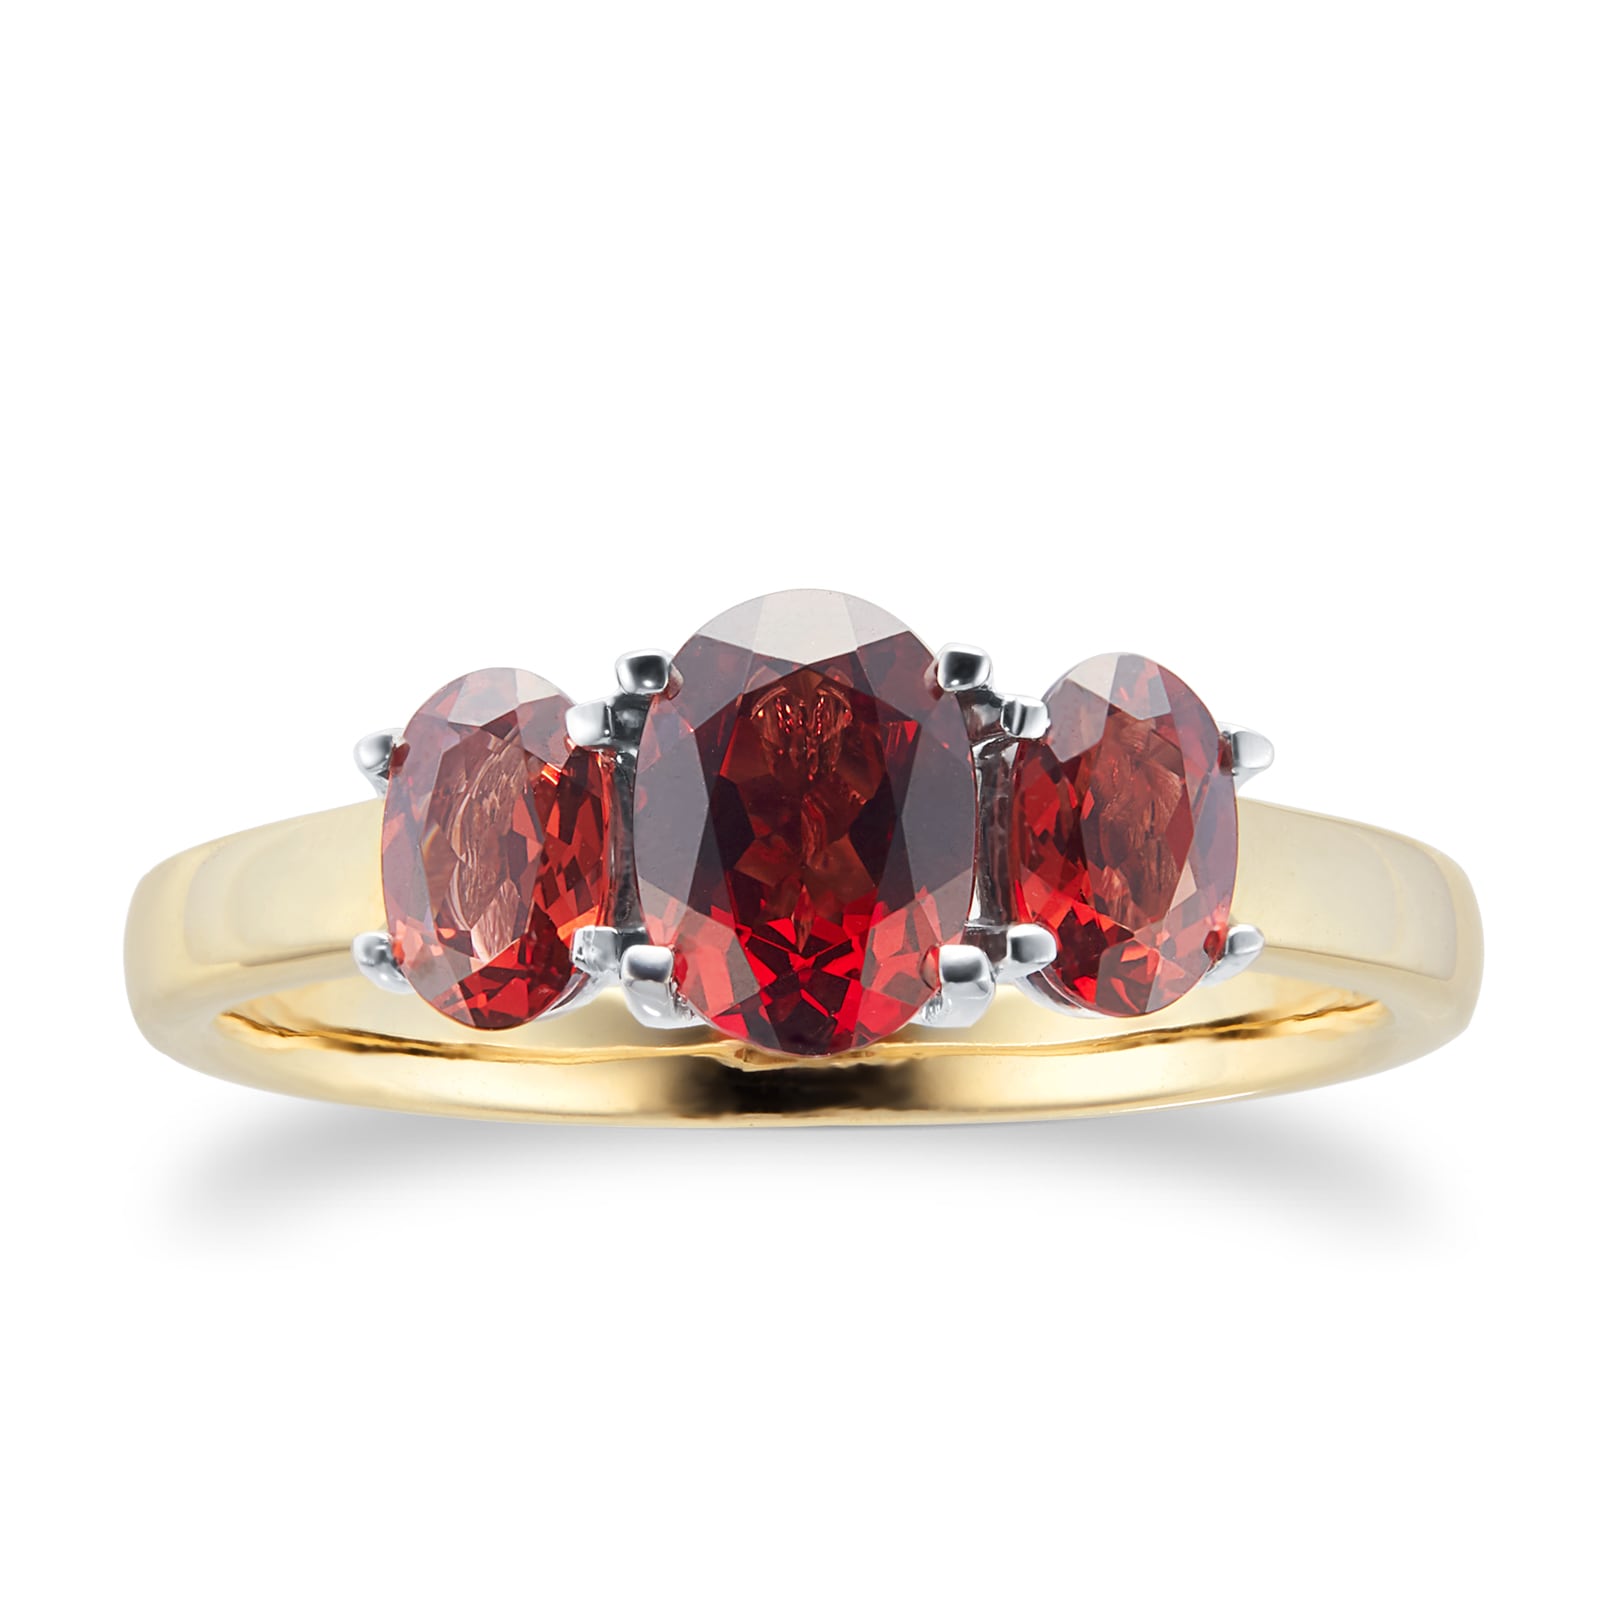 9ct Yellow and White Gold 3 Stone Garnet Ring - Ring Size F